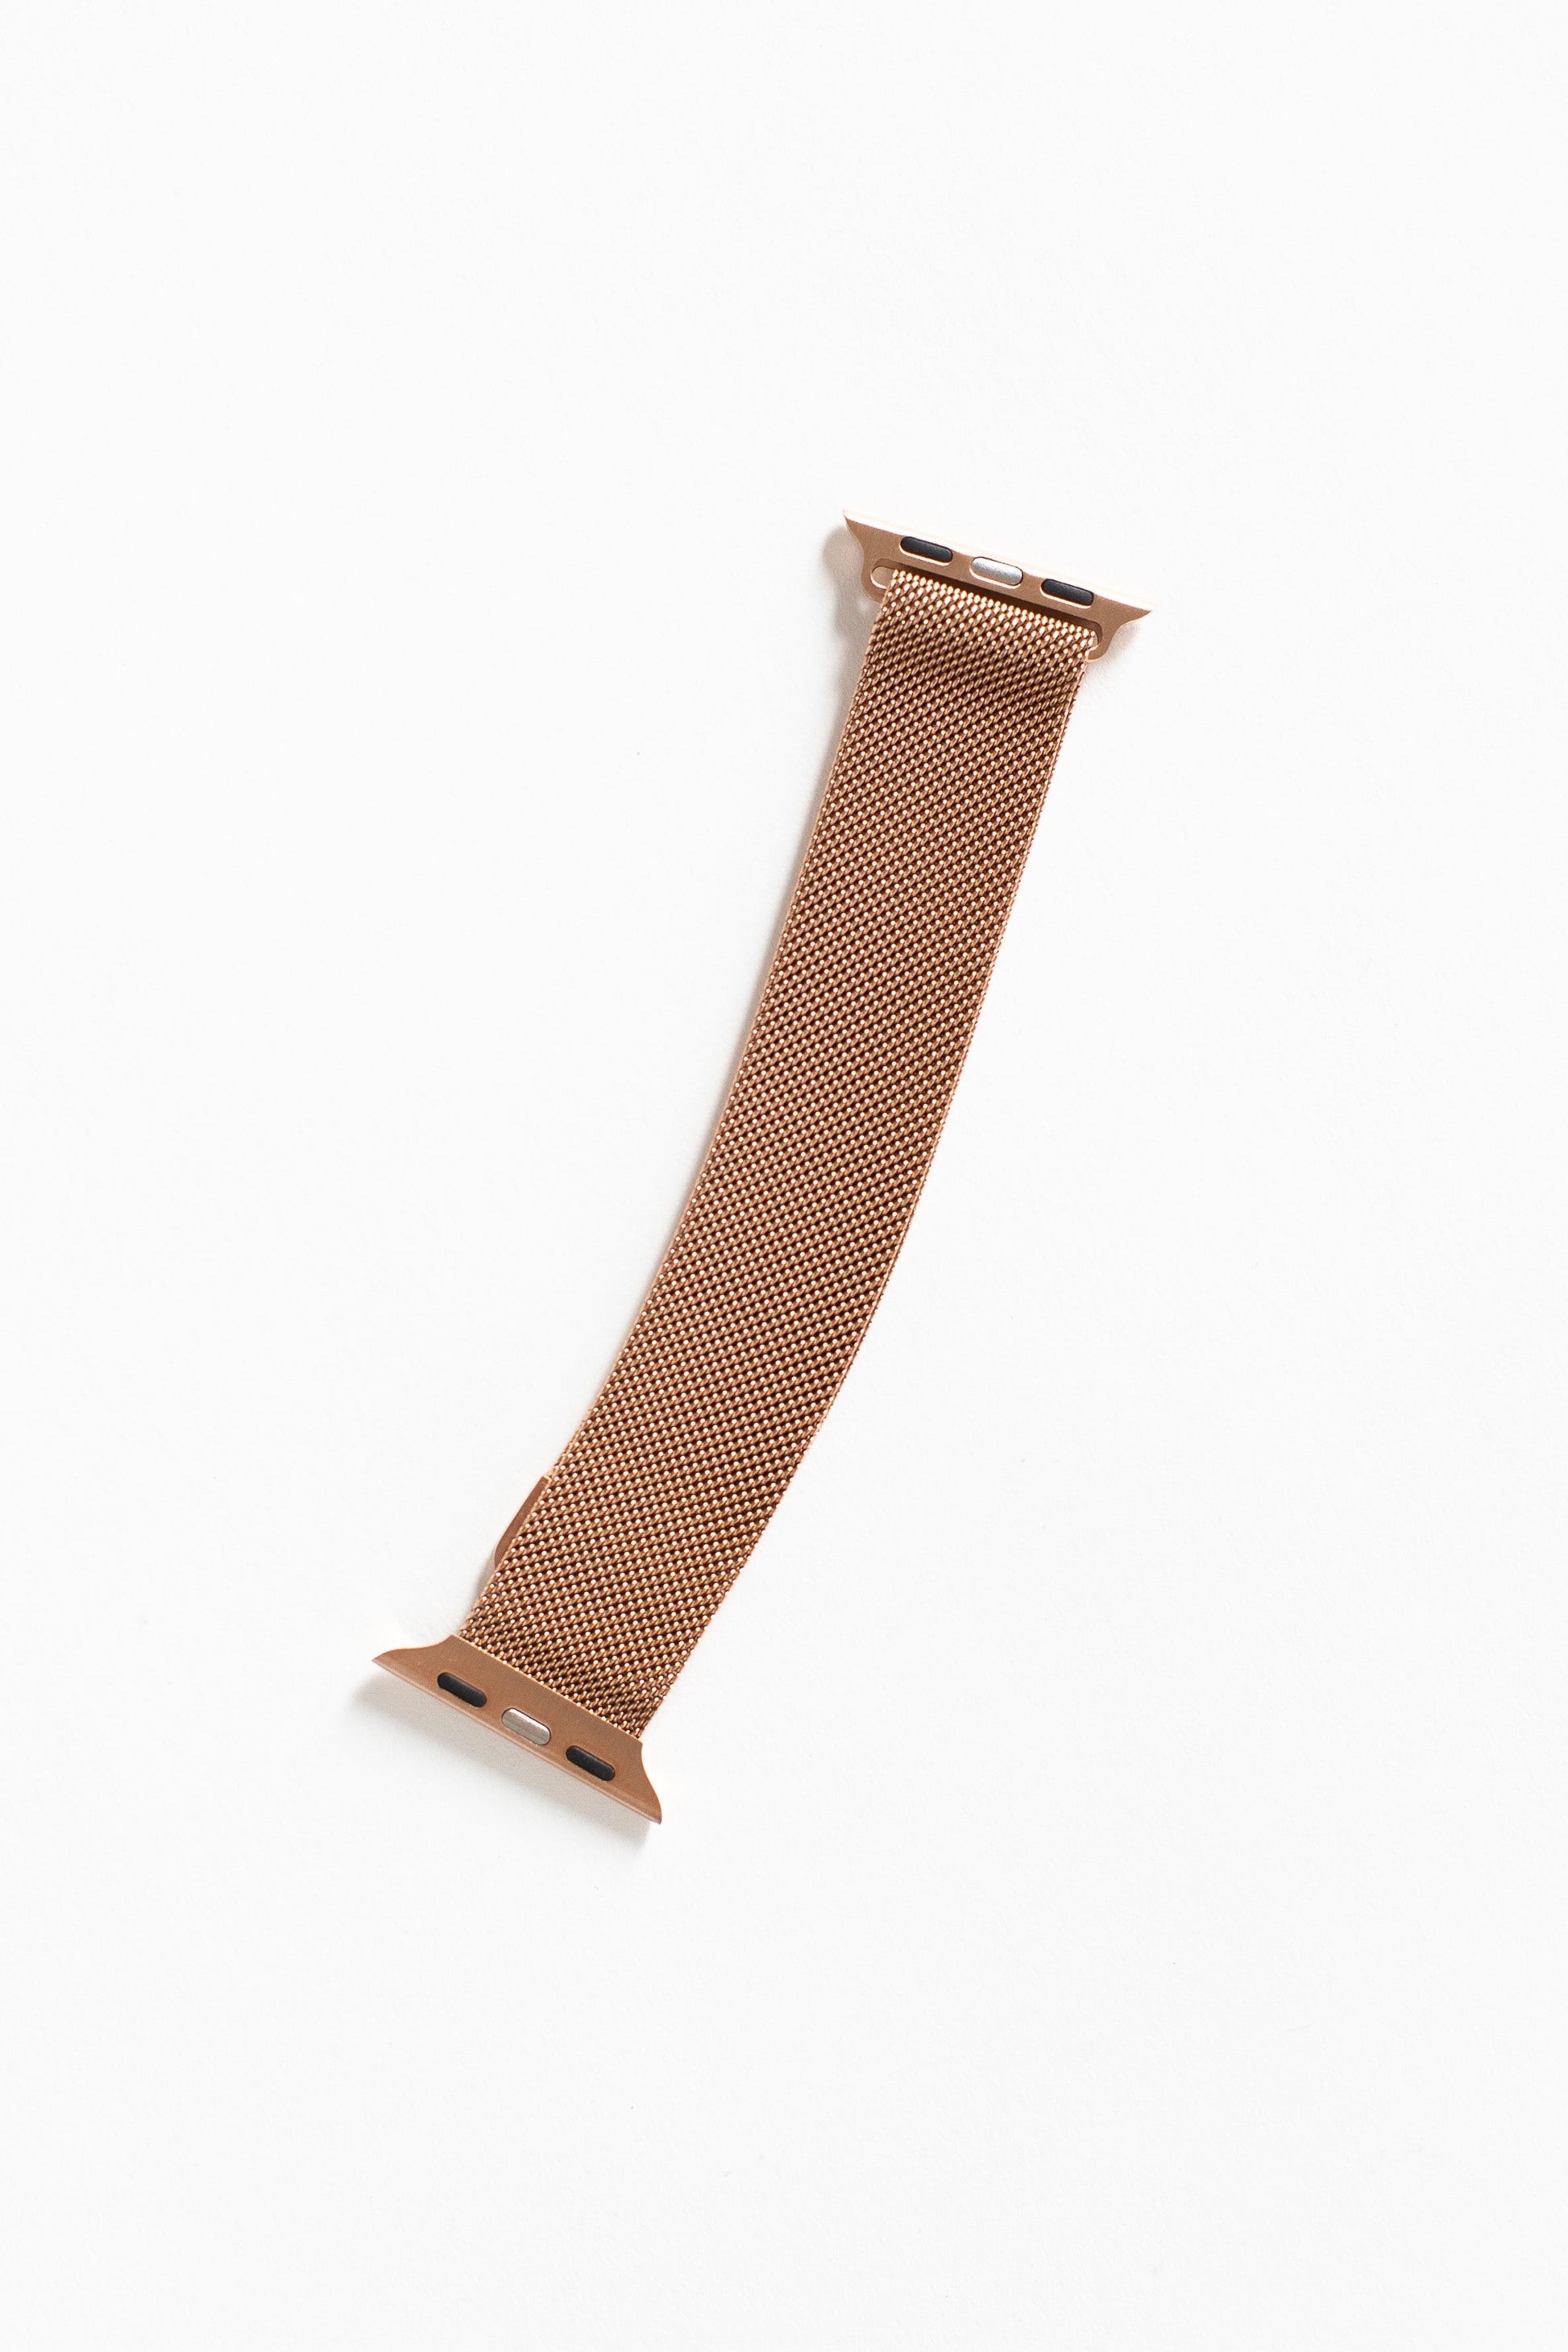 Rose Gold Apple Watch Band WOMEN'S ACCESSO RIES A.N.Enterprises Rose Gold OS 